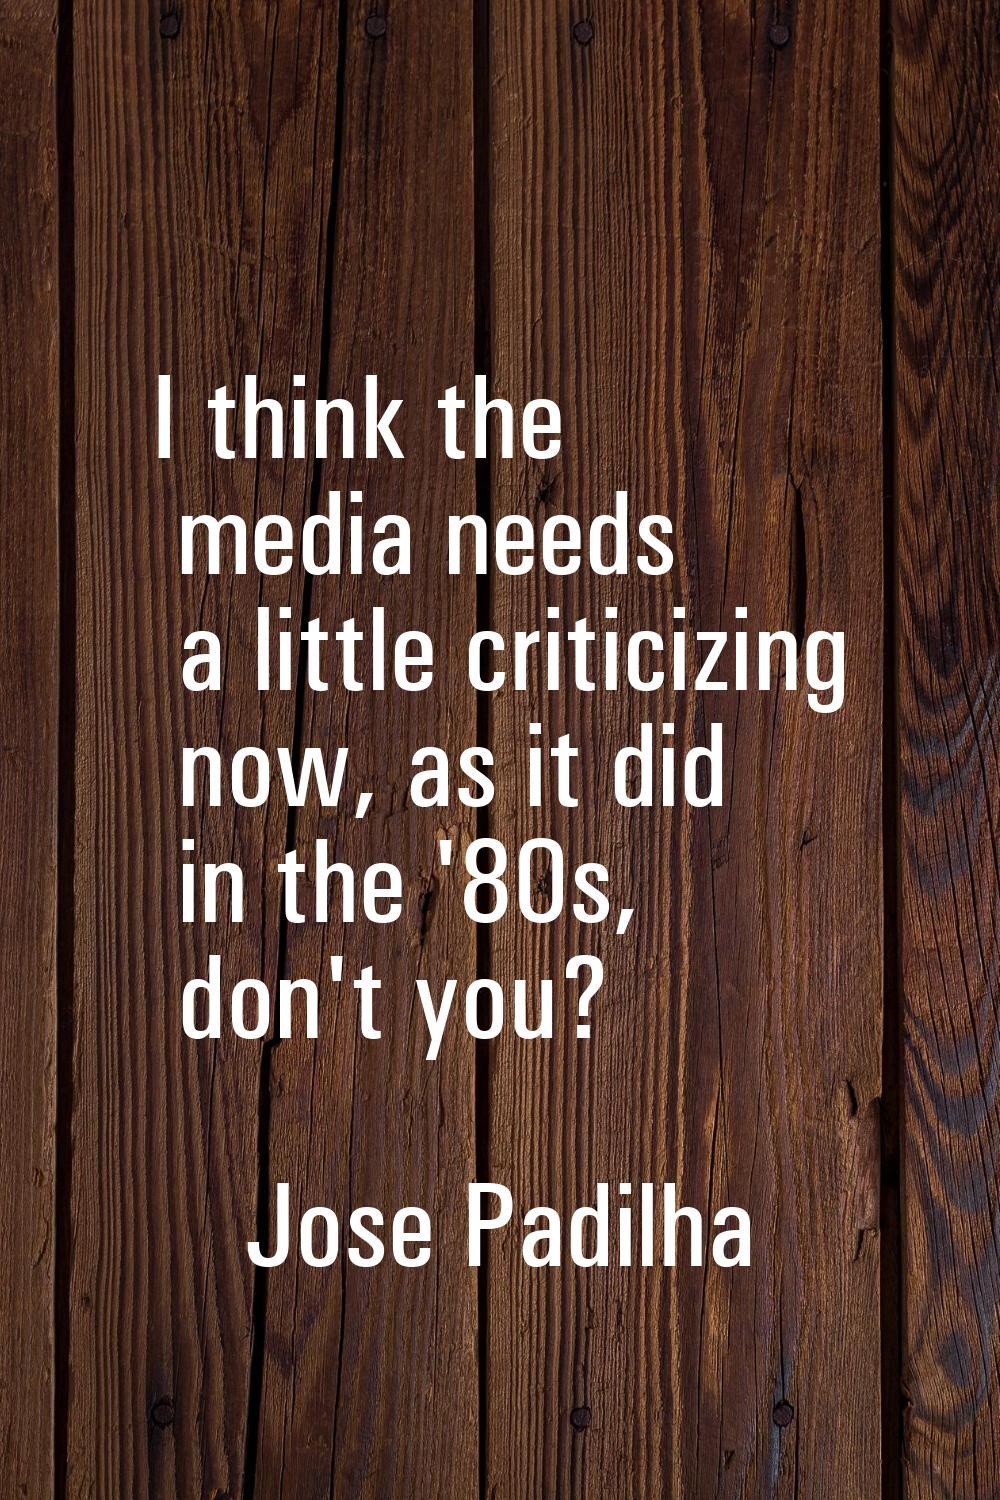 I think the media needs a little criticizing now, as it did in the '80s, don't you?